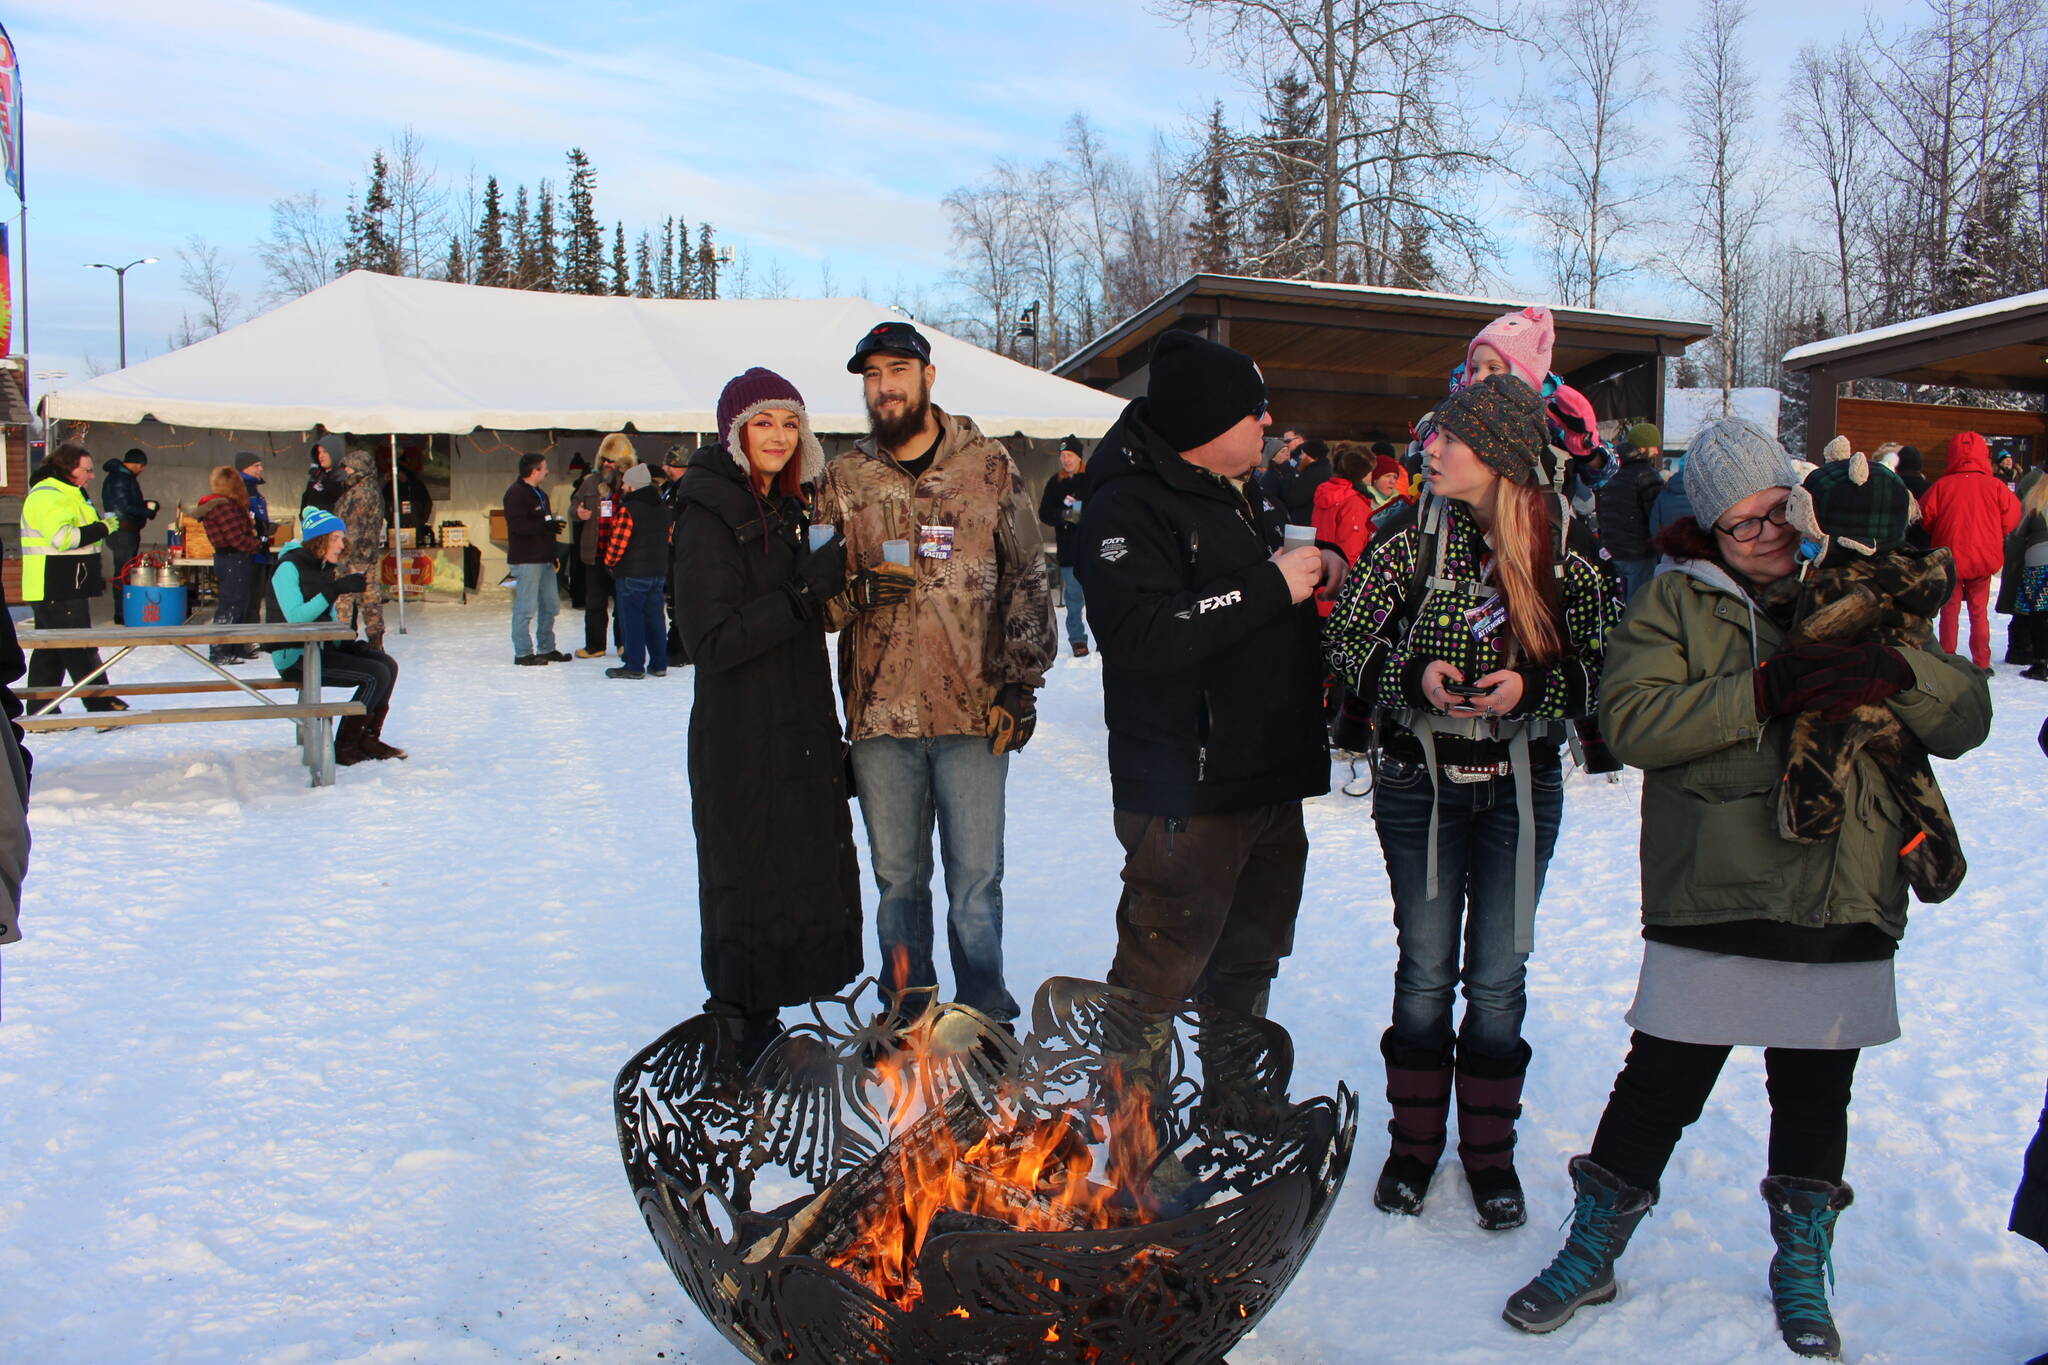 From left, Tiana McGahan, Aaron Hughes, Victor Thompson, McKayla Chadburn and Dawn Rimer keep warm around the fire during the 2020 Frozen RiverFest at Soldotna Creek Park in Soldotna, Alaska on Feb. 15, 2020. (Photo by Brian Mazurek/Peninsula Clarion)